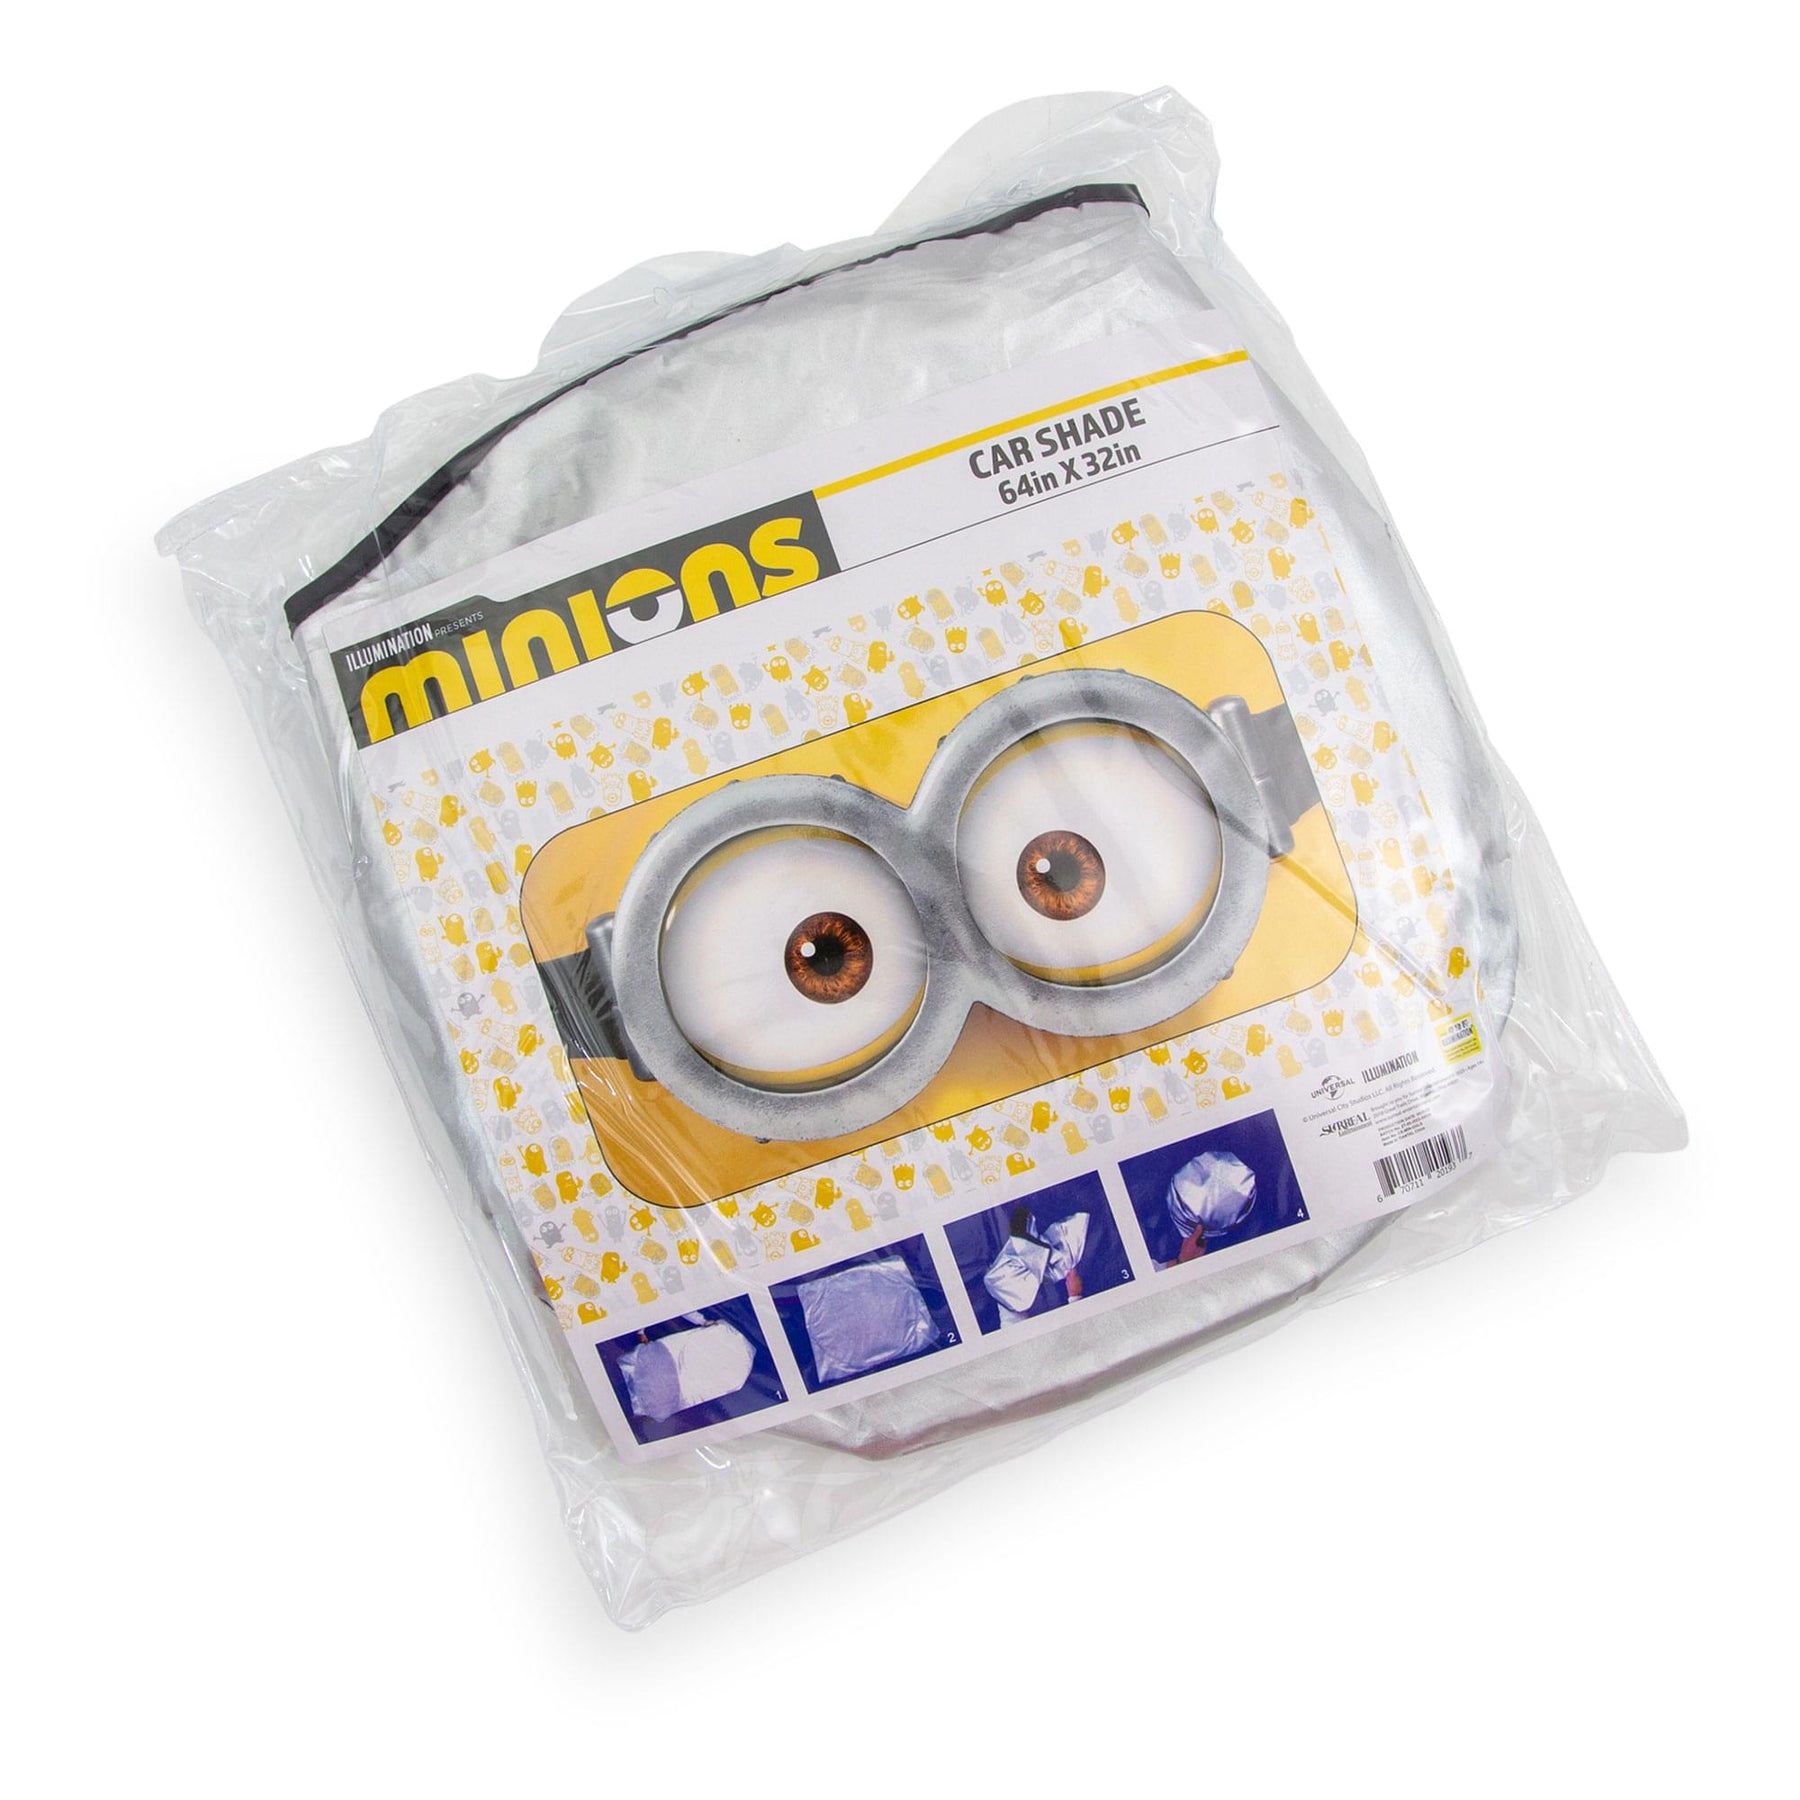 Despicable Me Minions Face Sunshade for Car Windshield | 64 x 32 Inches